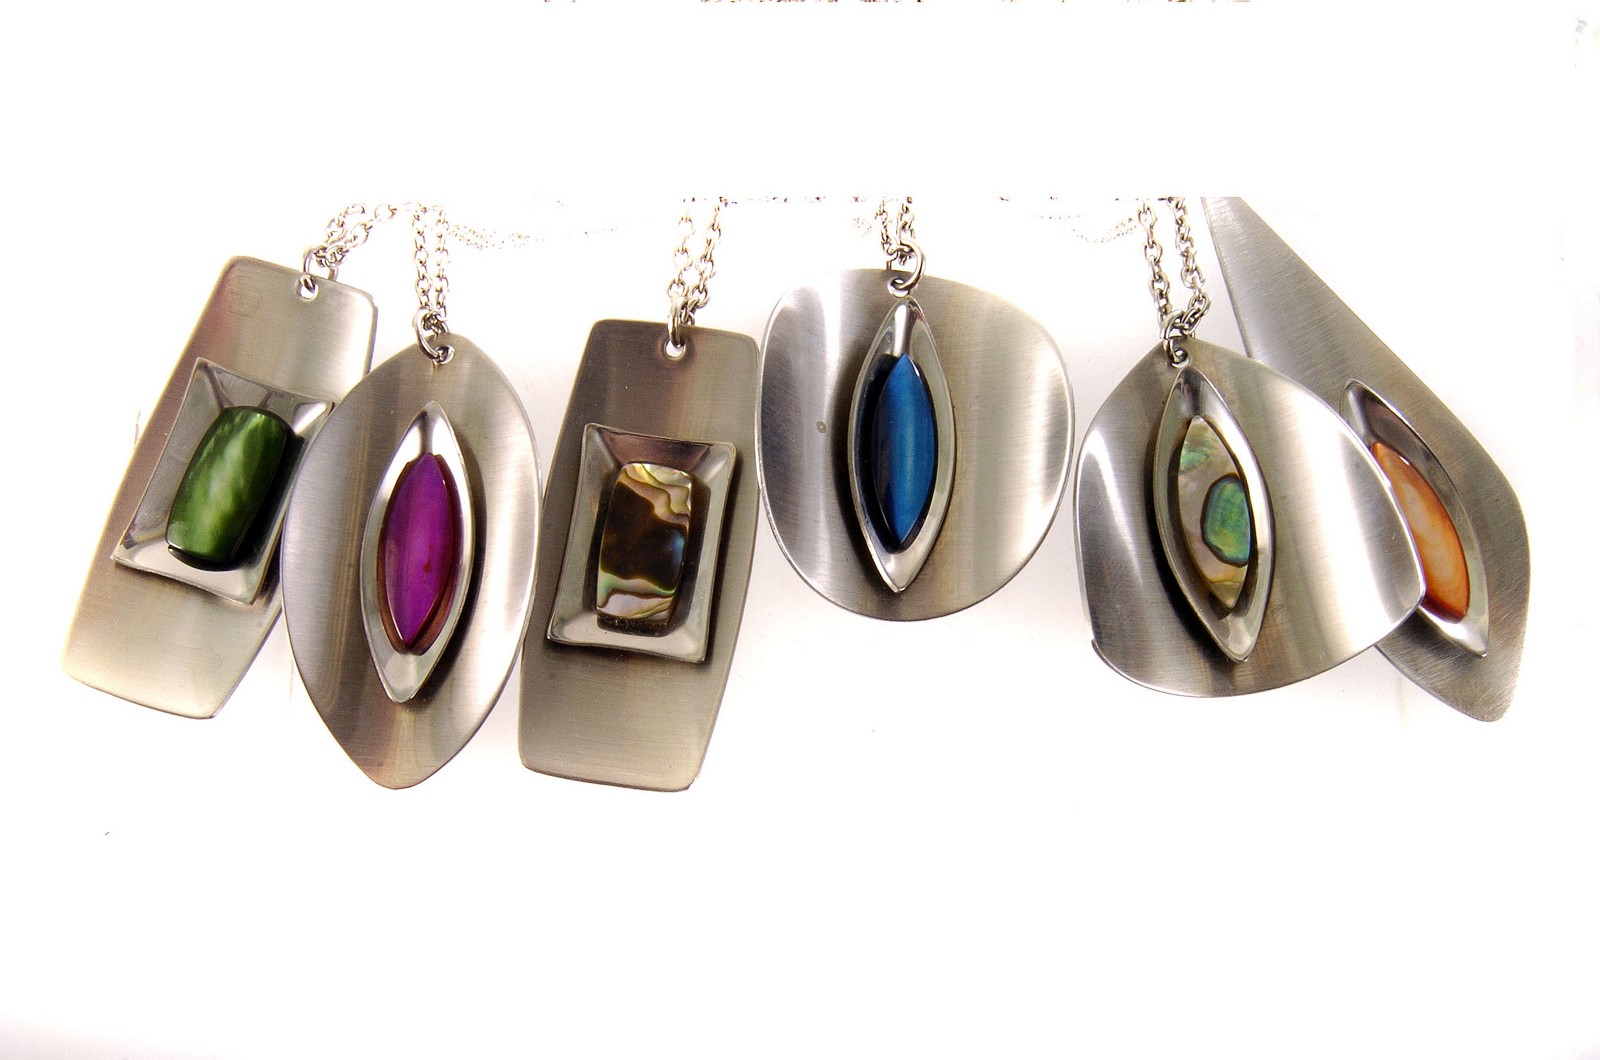 Six 1960s stainless steel and enamel pendants